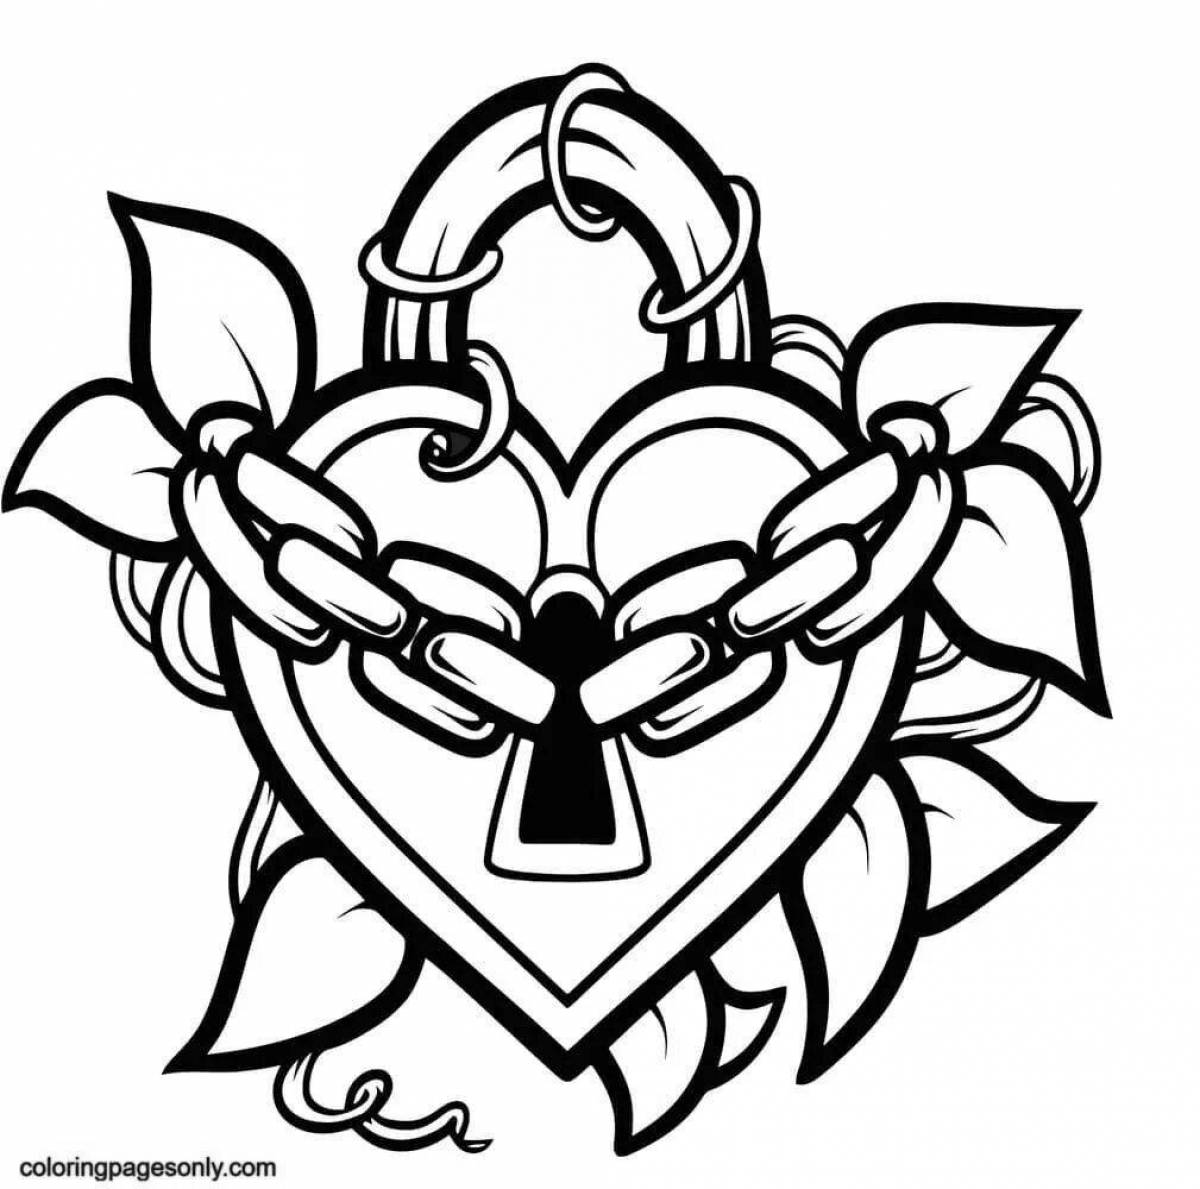 Fascinating tattoo coloring pages